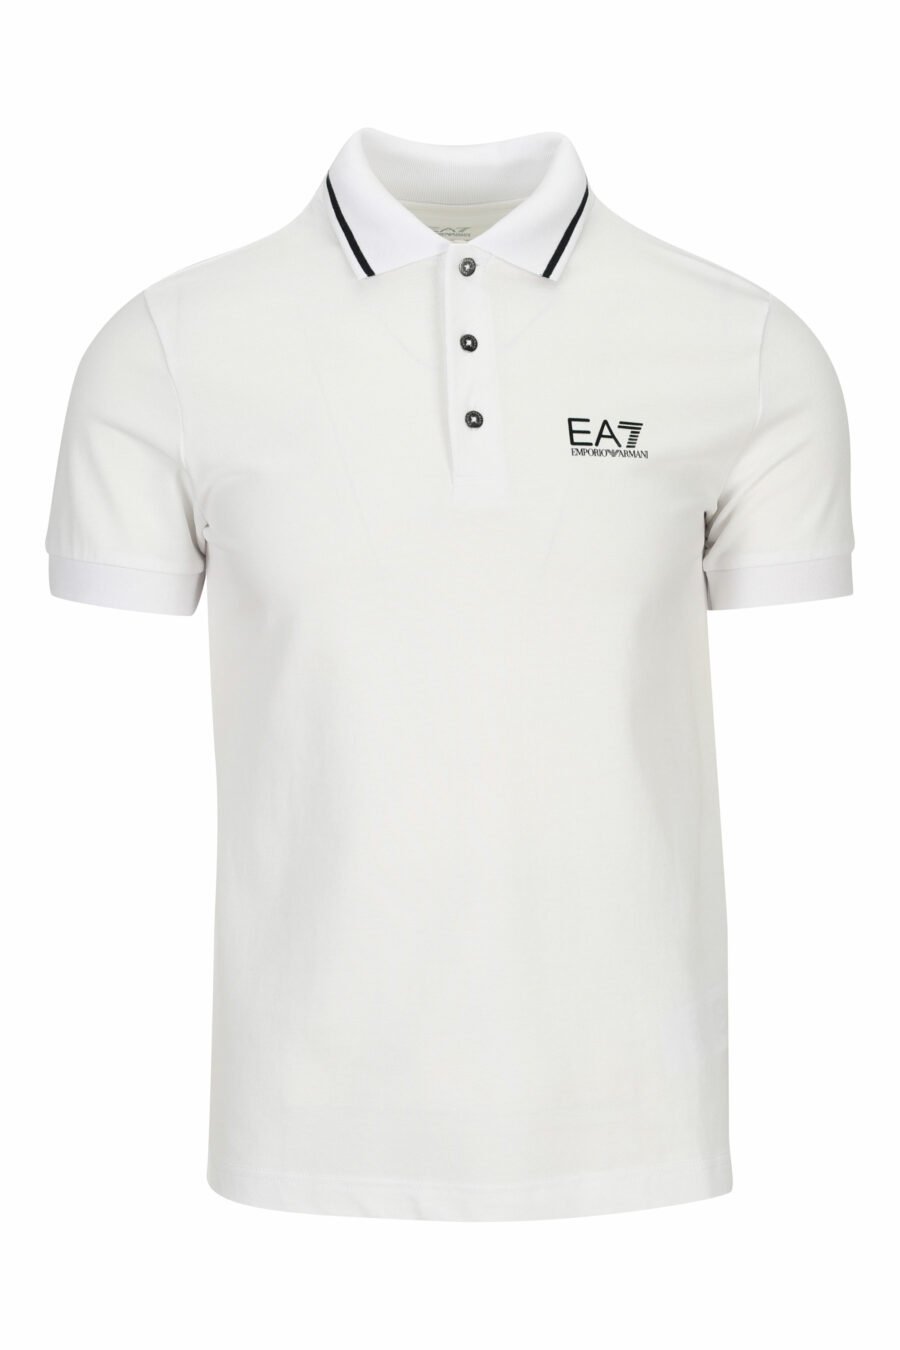 White polo shirt with "lux identity" minilogue and black stripes on the collar - 8055187161060